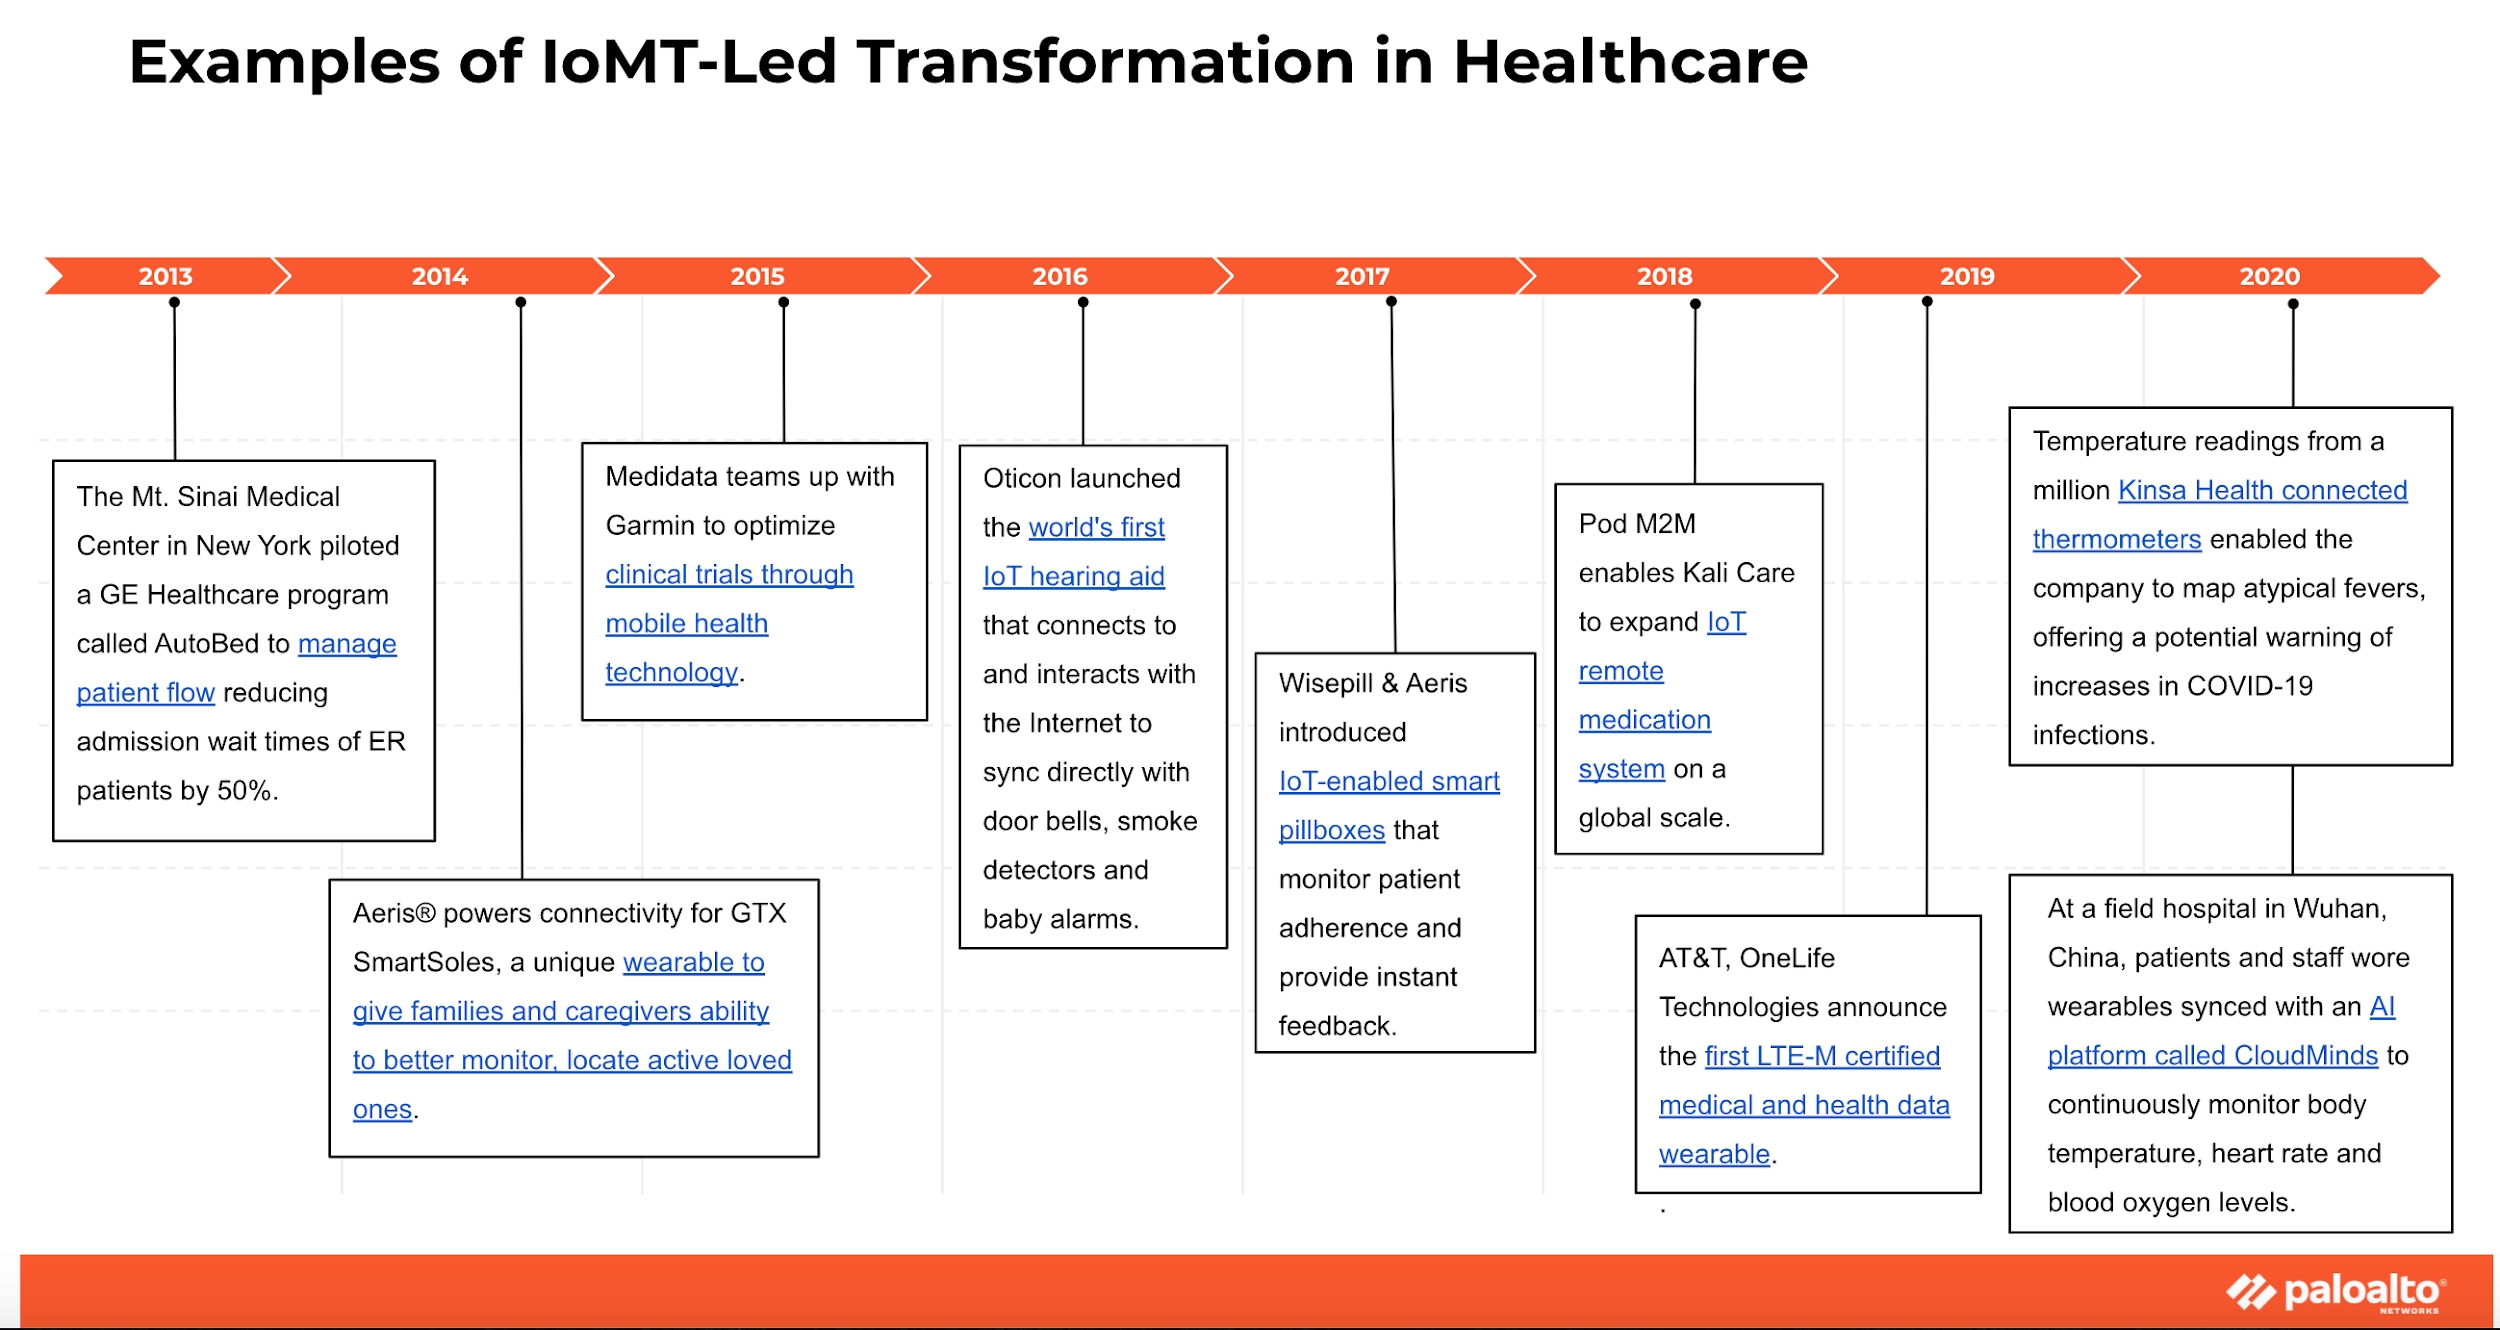 Examples of IoMT-Led Transformation in Healthcare